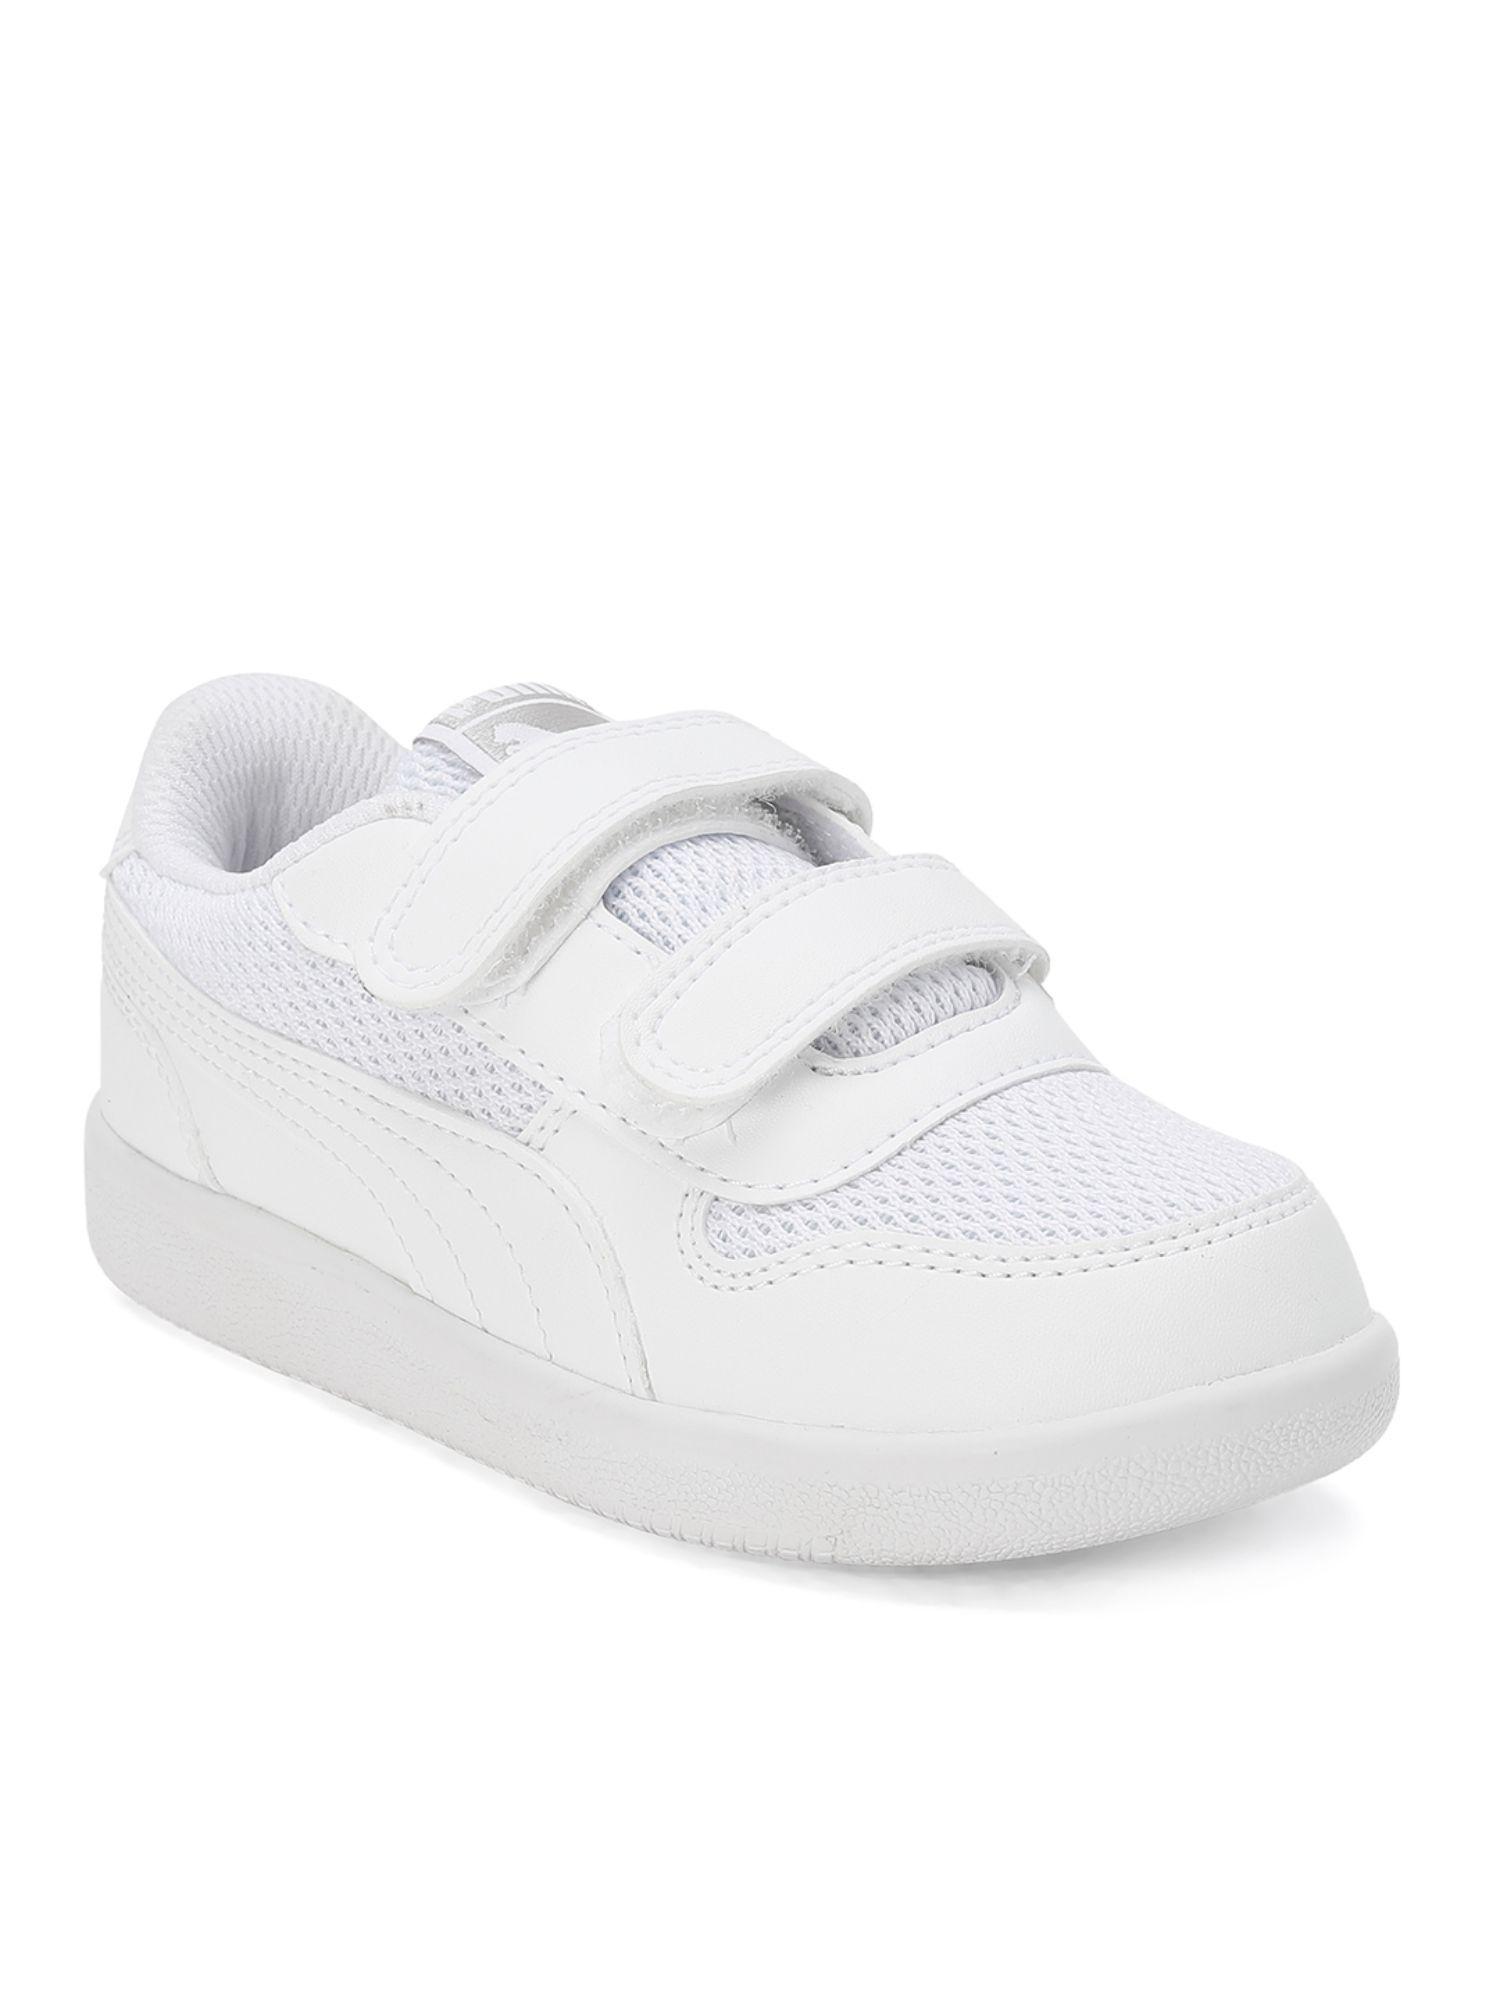 punch comfort infant kids white casual shoes